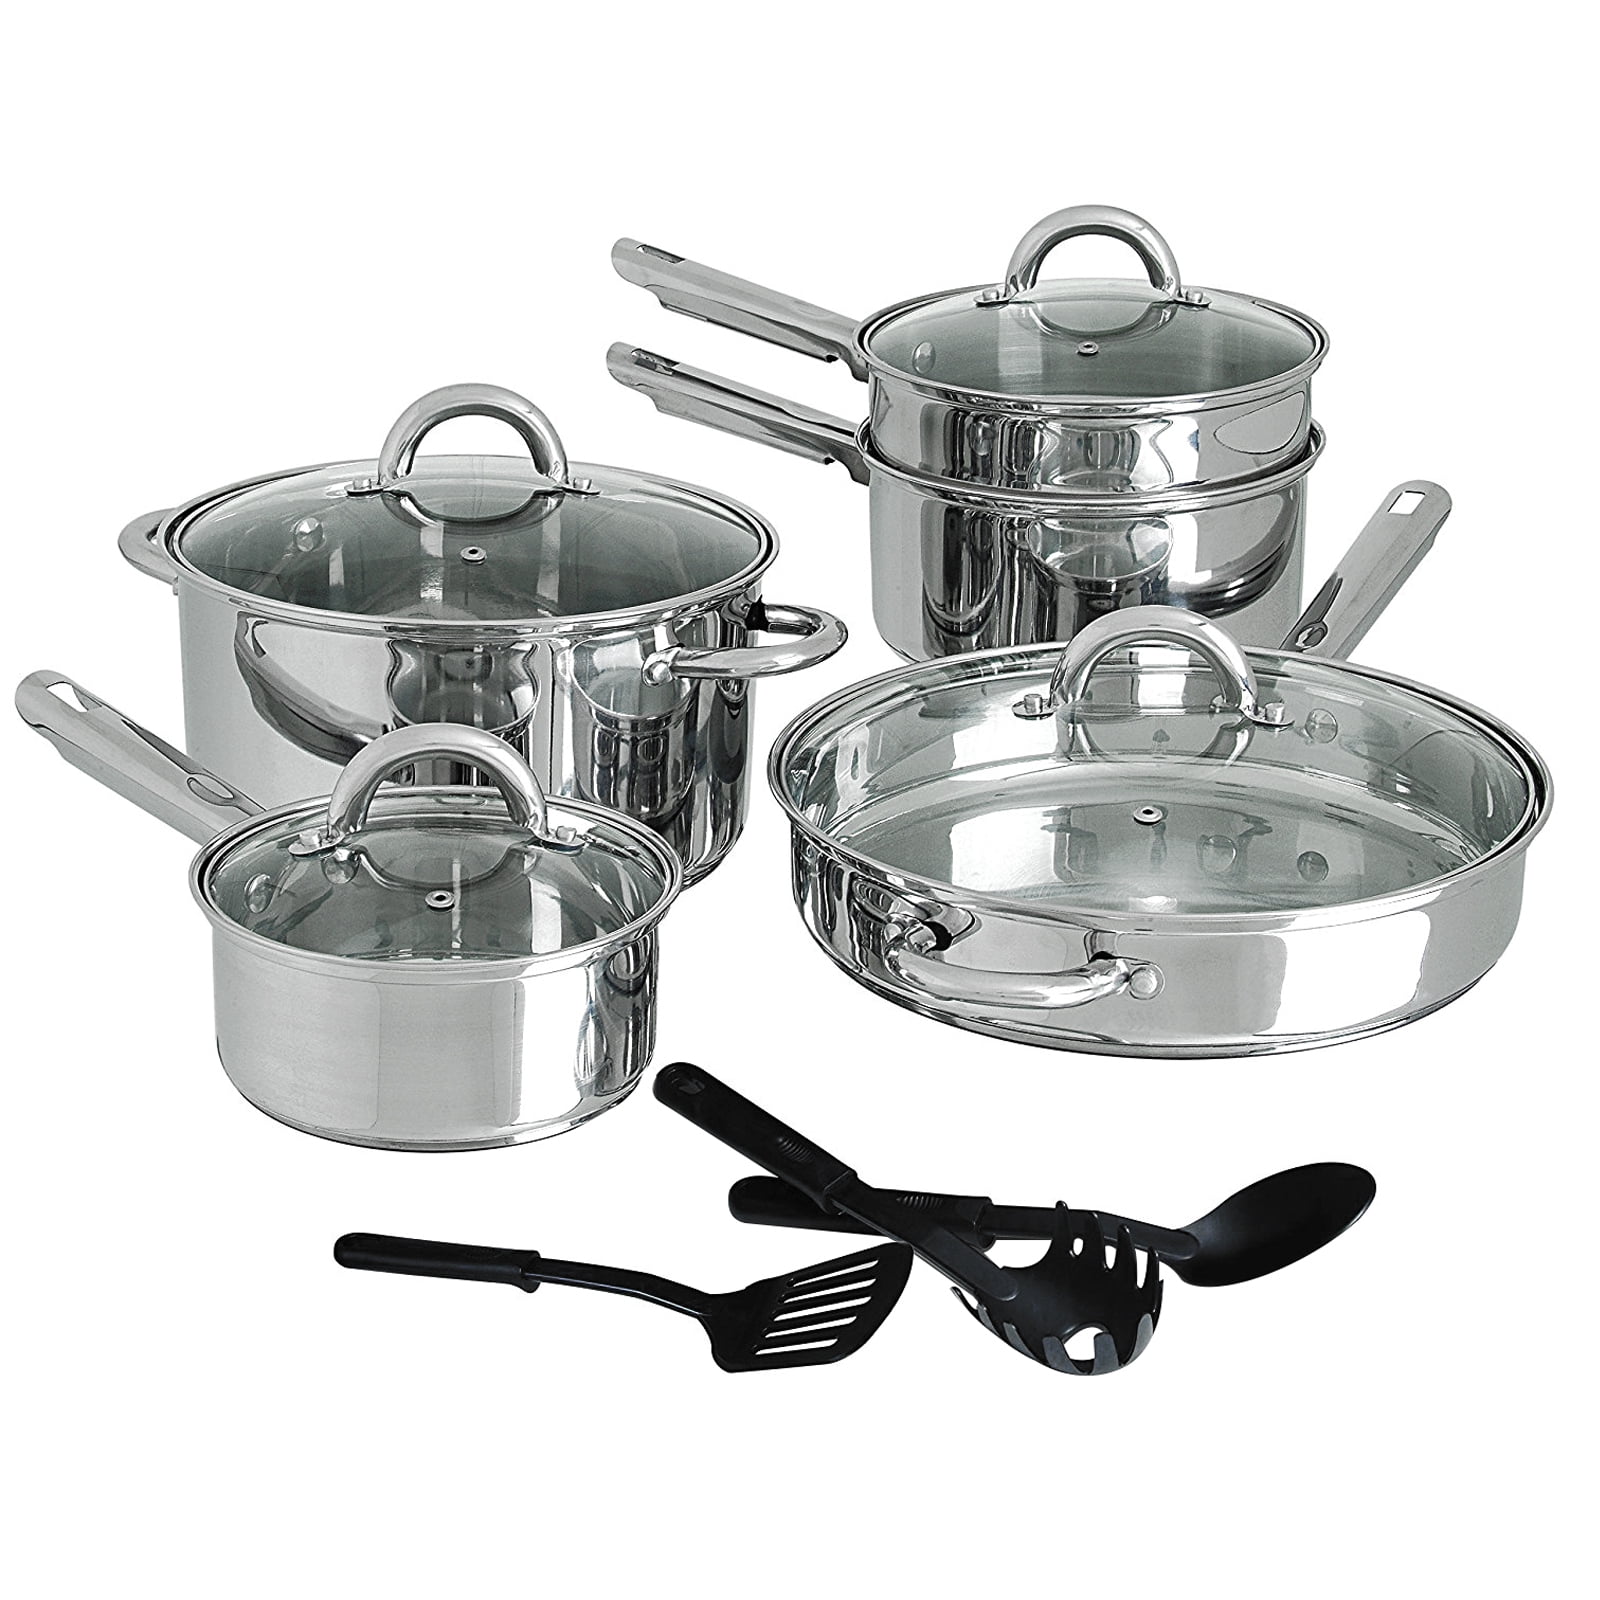 Cusine Select Abruzzo Stainless Steel 12 Piece Cookware Set